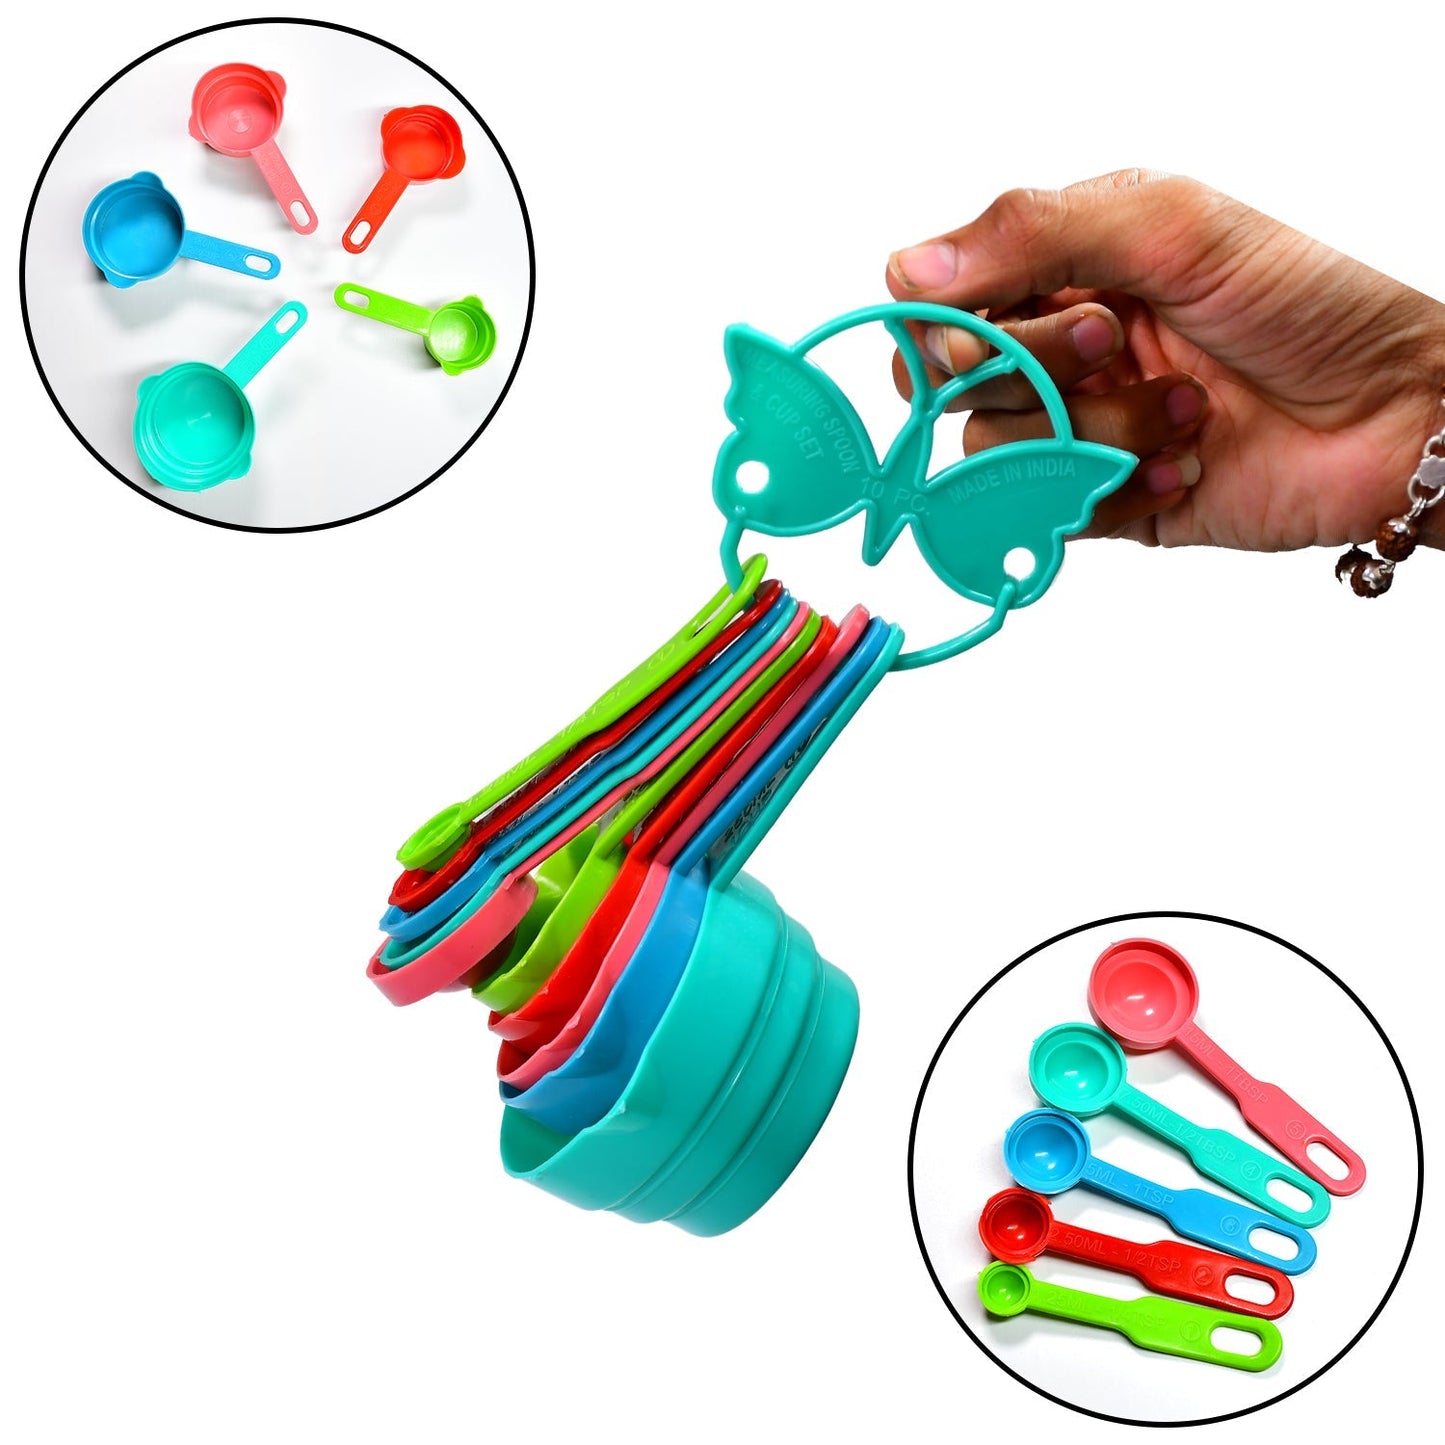 2906 10Pcs Plastic Measuring Spoons and Cups Set for Home Kitchen Cooking. DeoDap